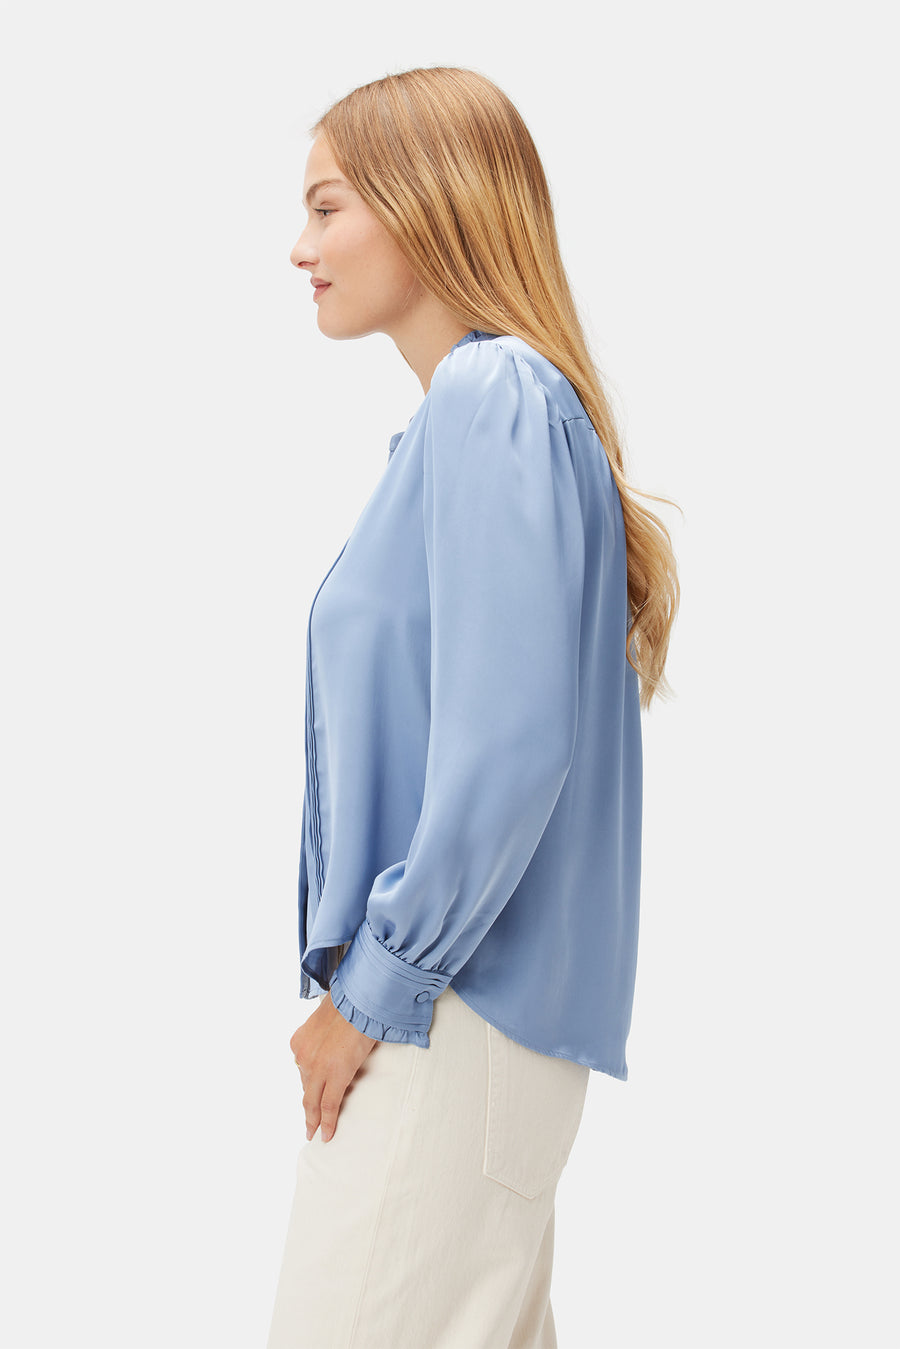 Charlotte Recycled Polyester Blouse - Horizon